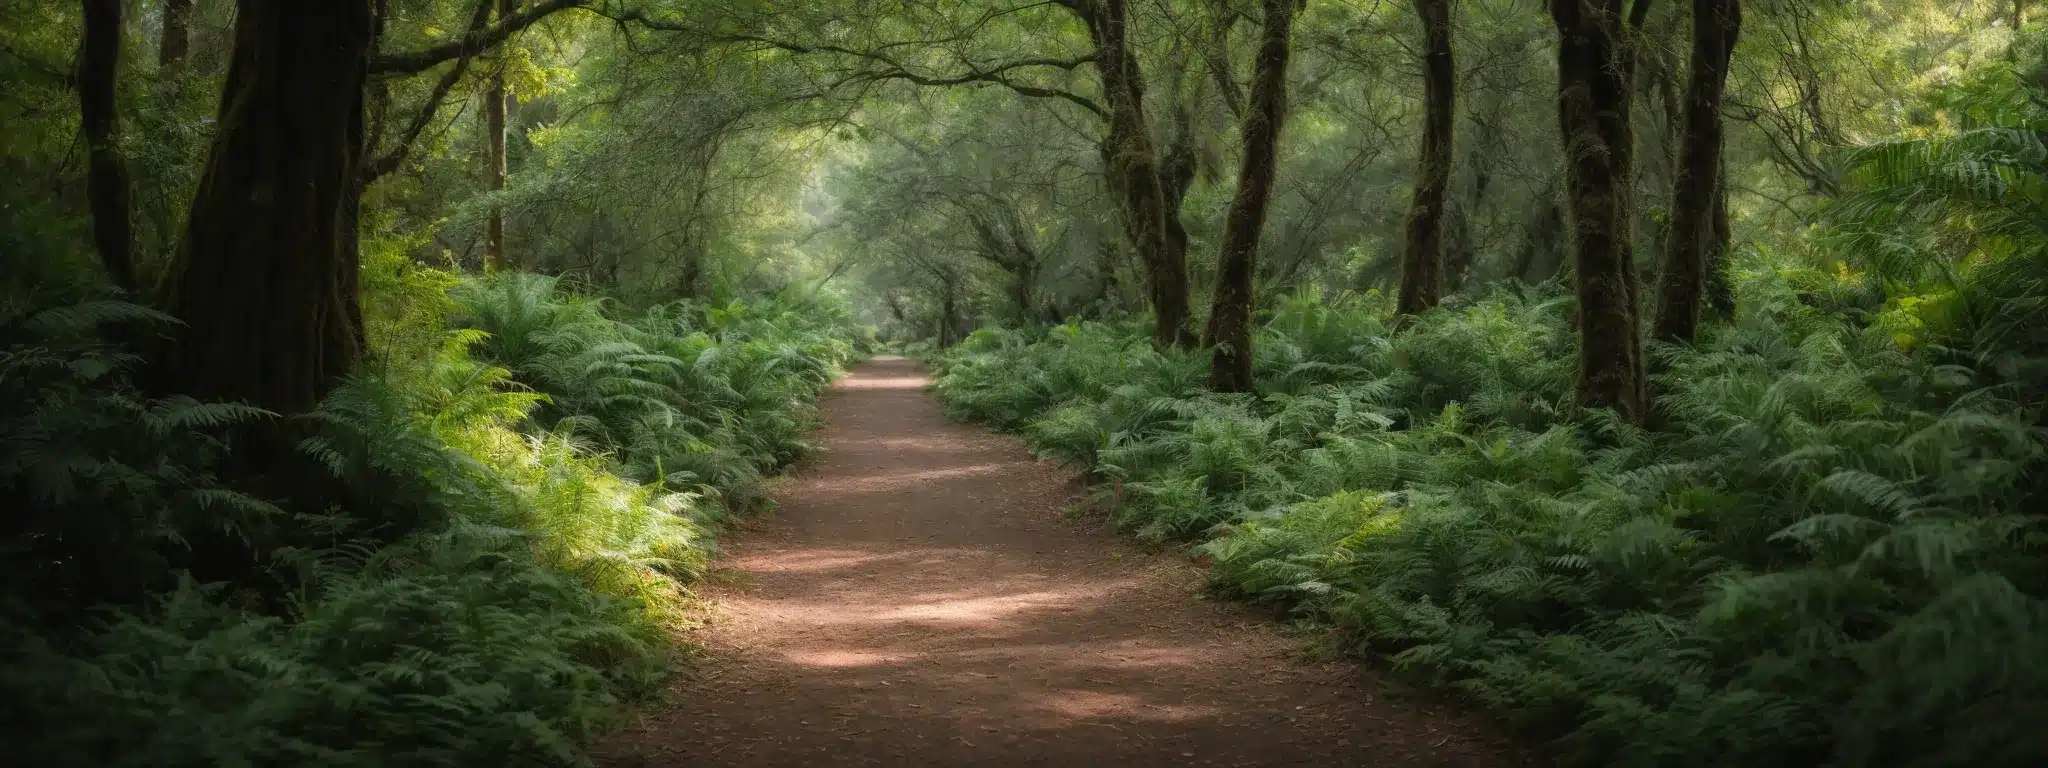 A Serene, Well-Lit Pathway Leading Through A Lush, Vibrant Forest, Symbolizing A Delightful And Intuitive User Journey In The Digital Landscape.